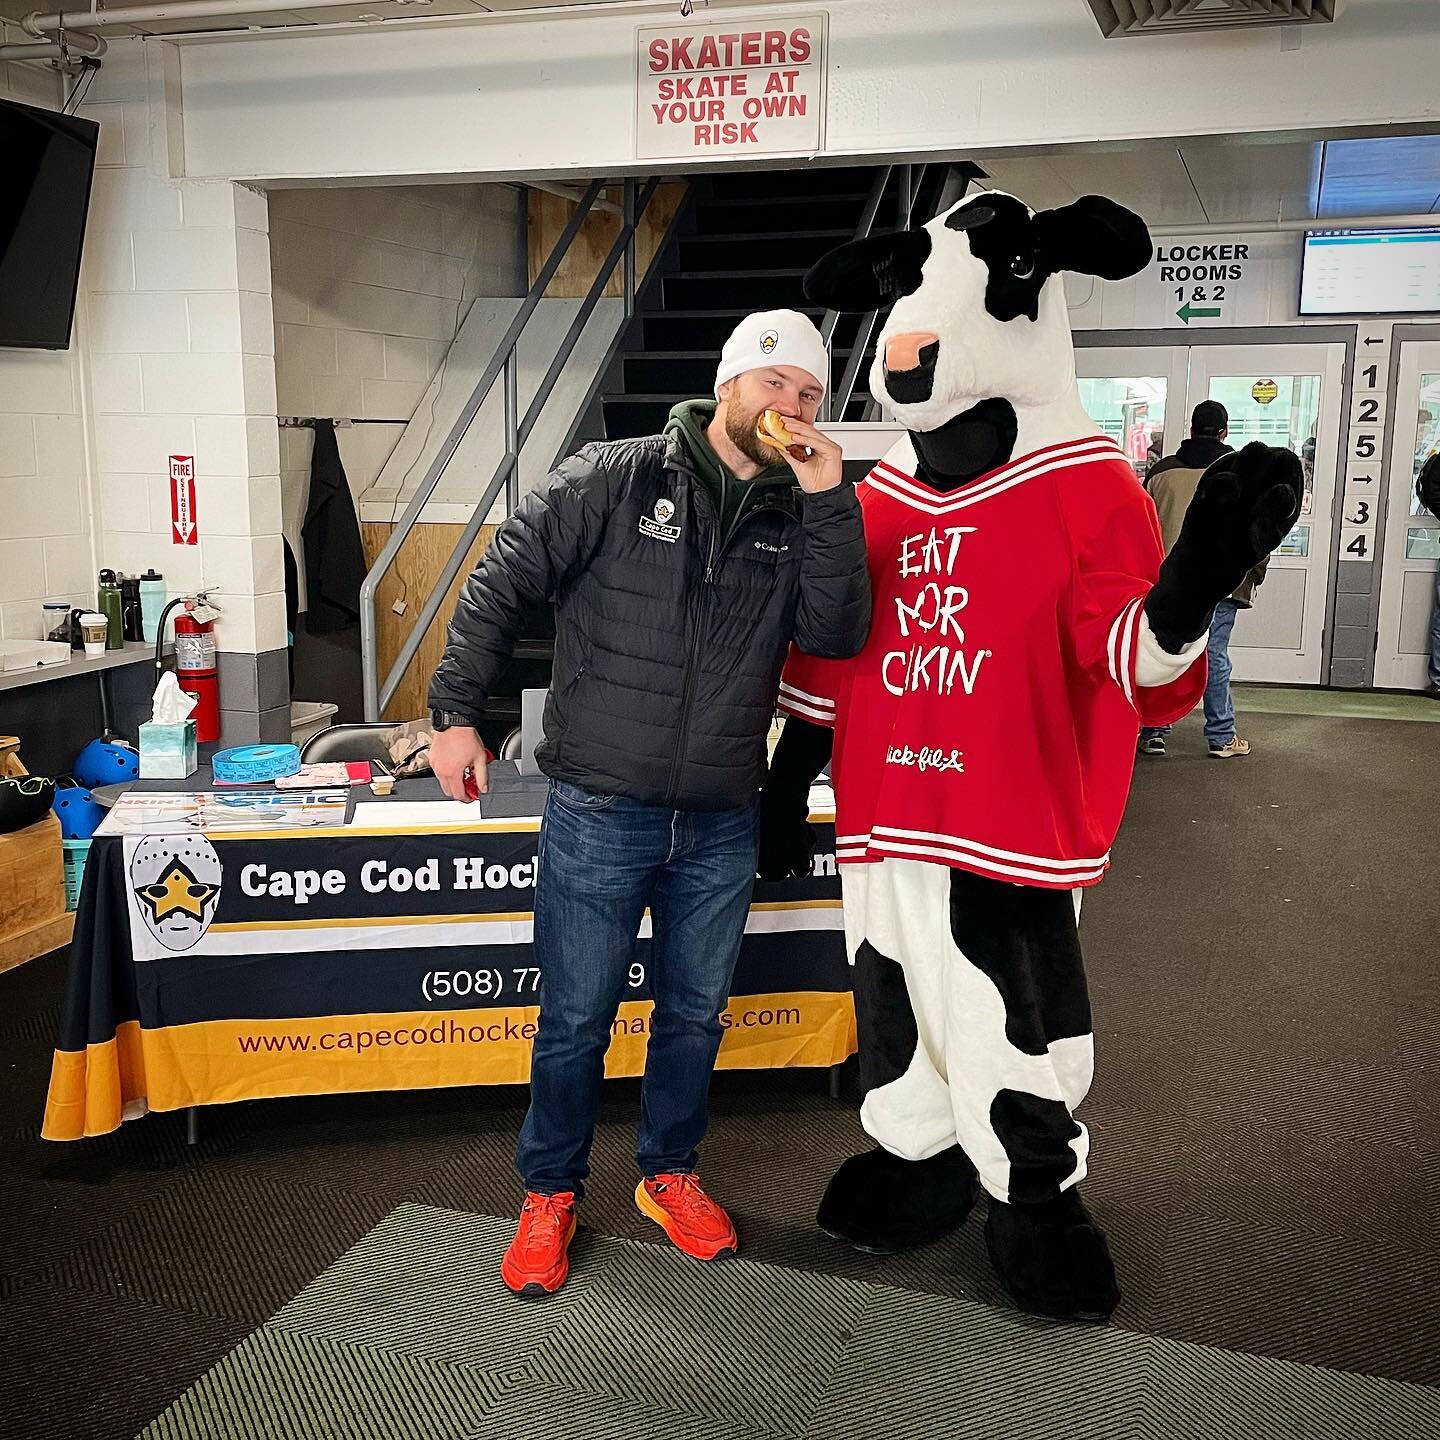 Don&rsquo;t forget to enjoy @chickfilacapecod today at @tonykentarena today!🍴🐣

Yum yum yummm 😋 They will be here until 3pm!

#capecodhockeytournaments #hockey #capecodhockey #capecod #capecodfun #icehockey #fun #nhl #tournaments #linkinbio #ccht 